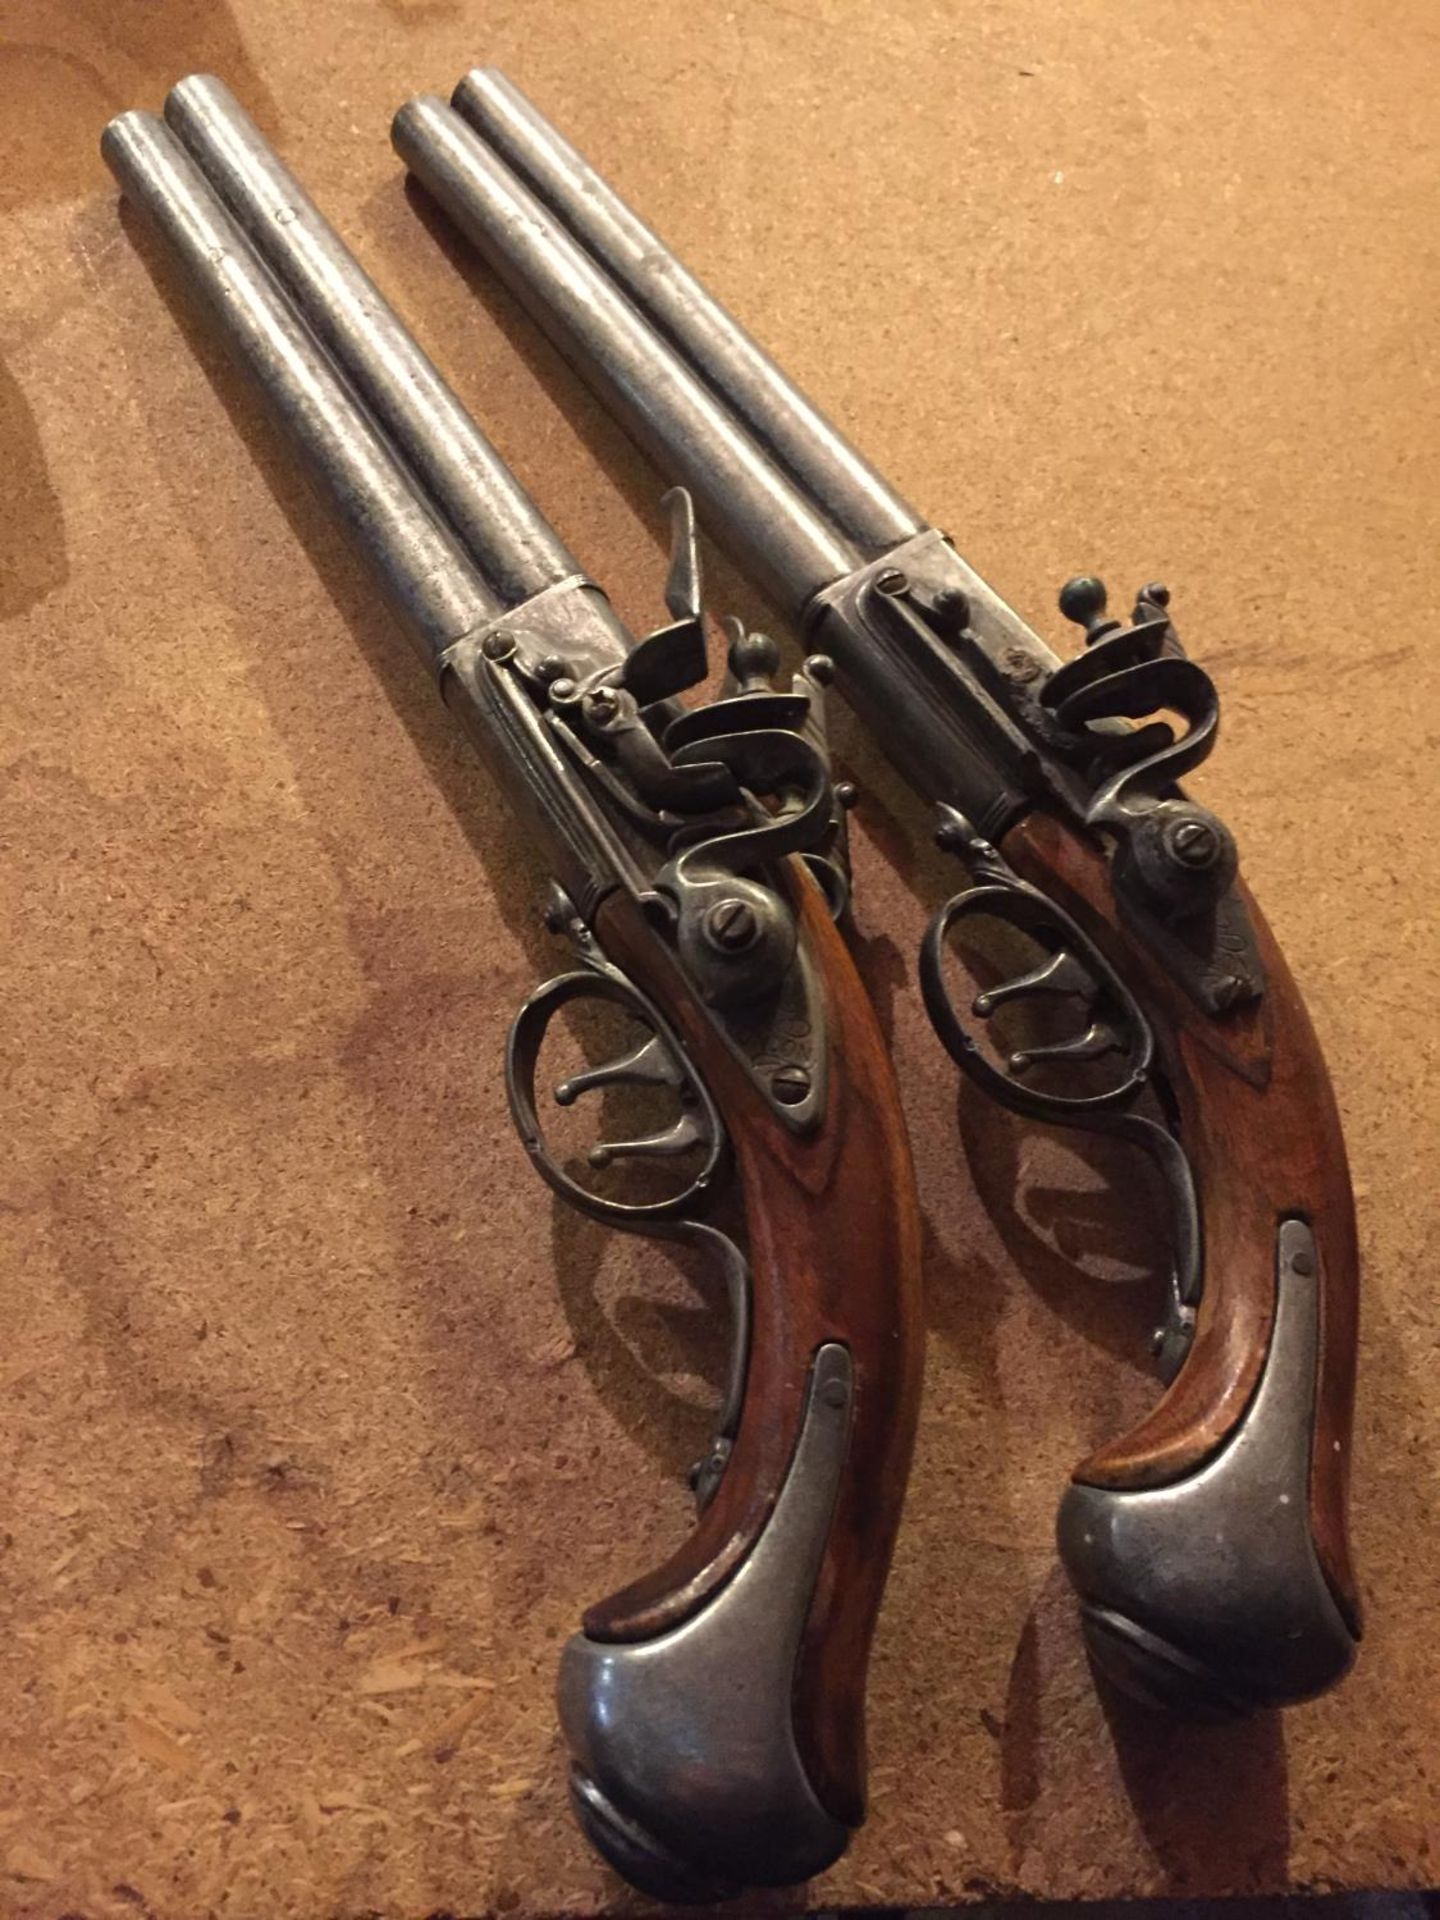 A PAIR OF REPRODUCTION FLINTLOCK PISTOLS AND A KNIFE IN AN ORNATE SHEATH - Image 5 of 12